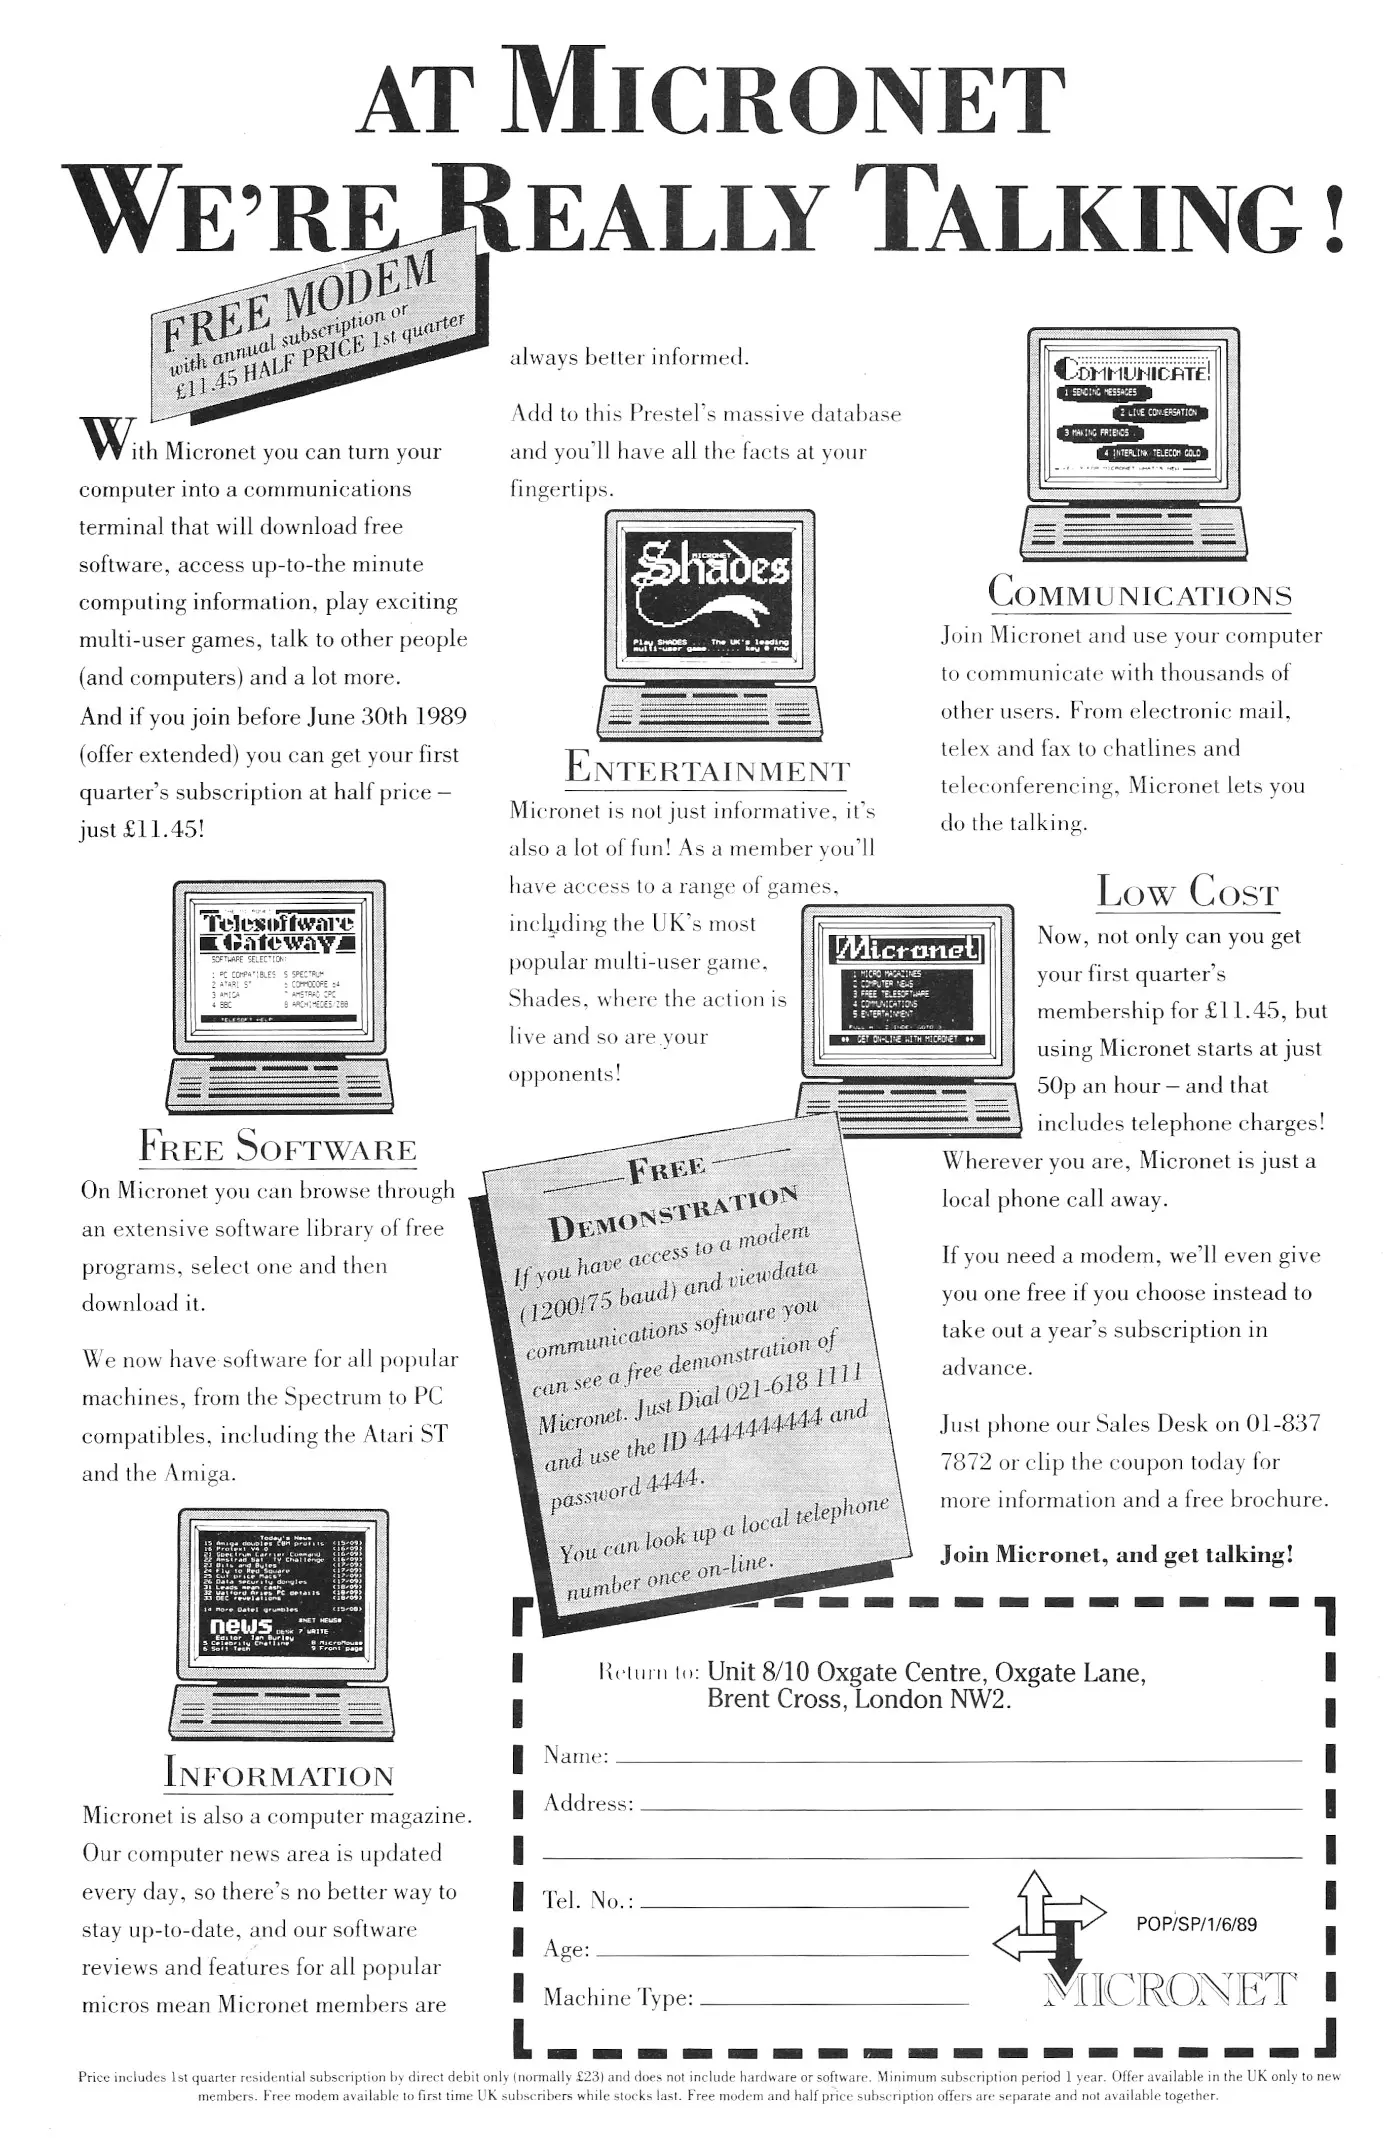 Micronet Advert: At Micronet we're really talking, from Popular Computing Weekly, 1st June 1989